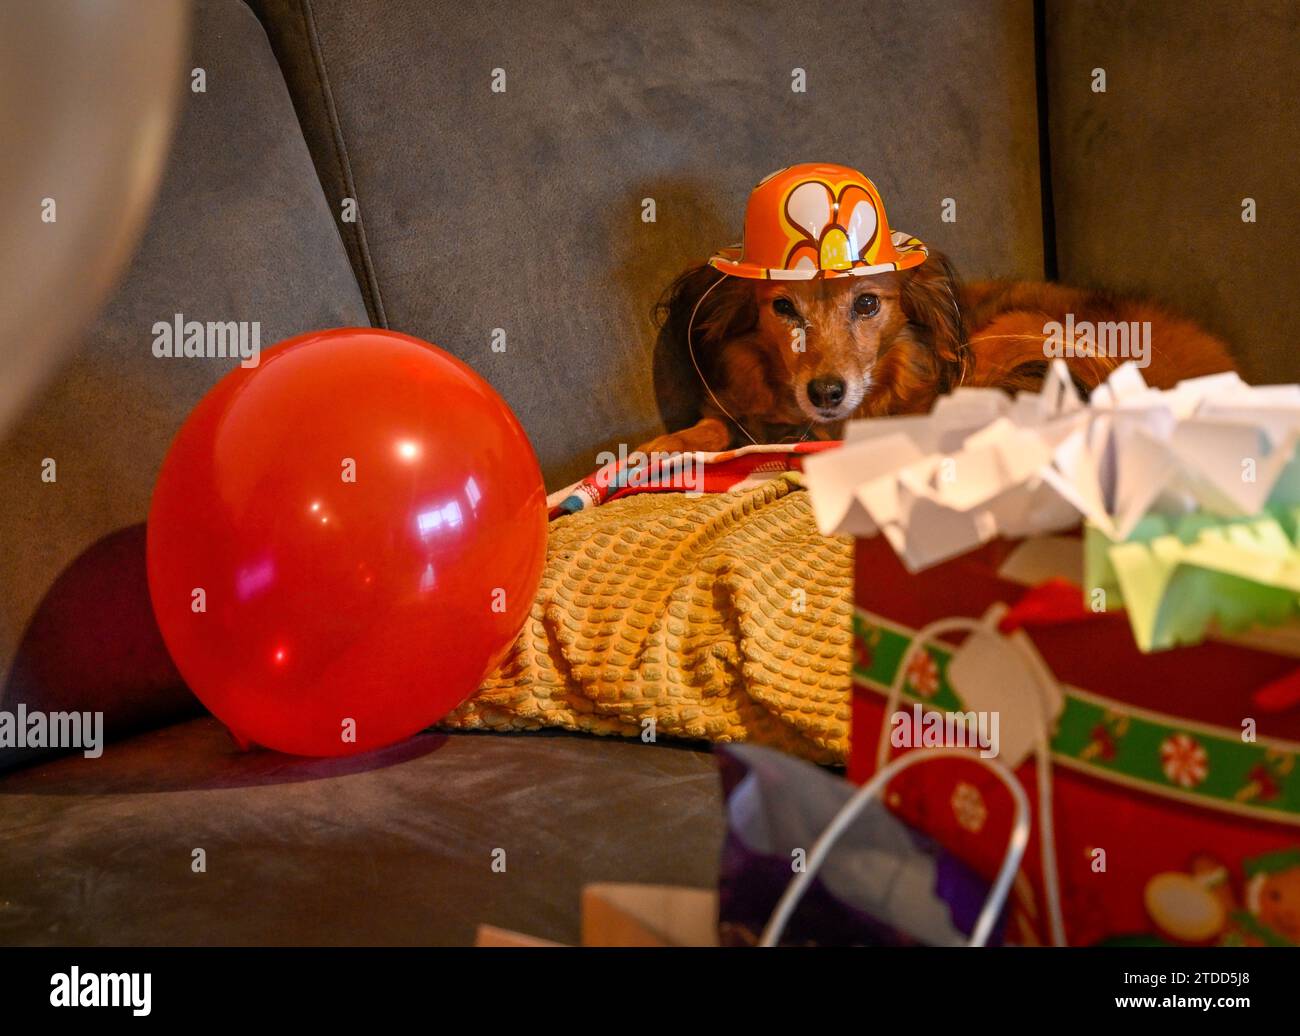 High resolution isolated close up portrait of a small dog wearing a funny birthday hat- Israel Stock Photo